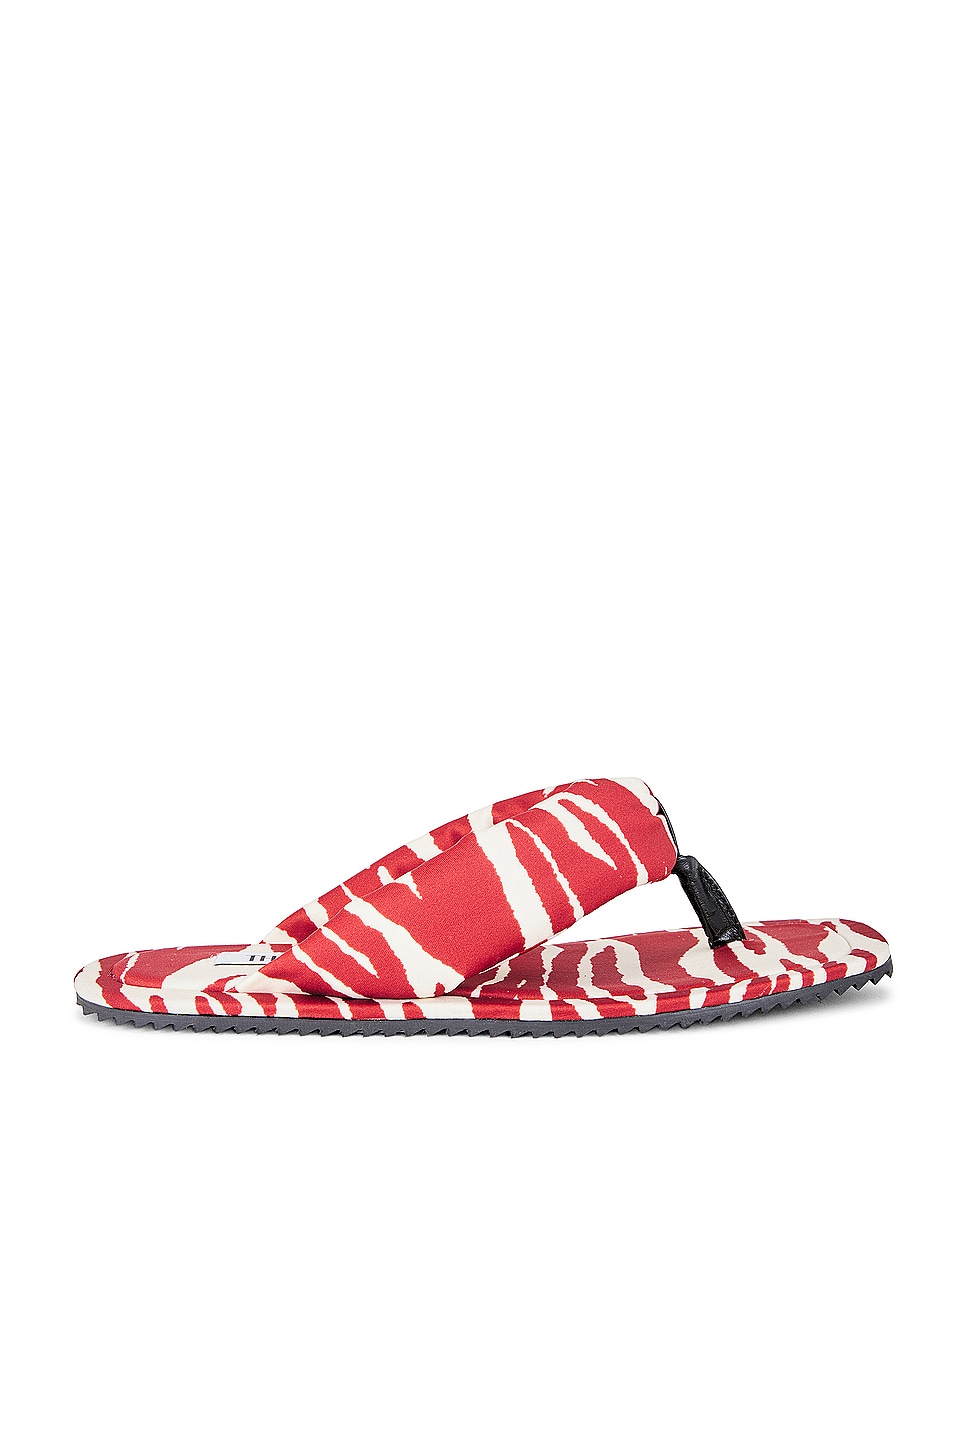 Image 1 of THE ATTICO Zebra Printed Indie Flat Thong Sandal in Red & Milk